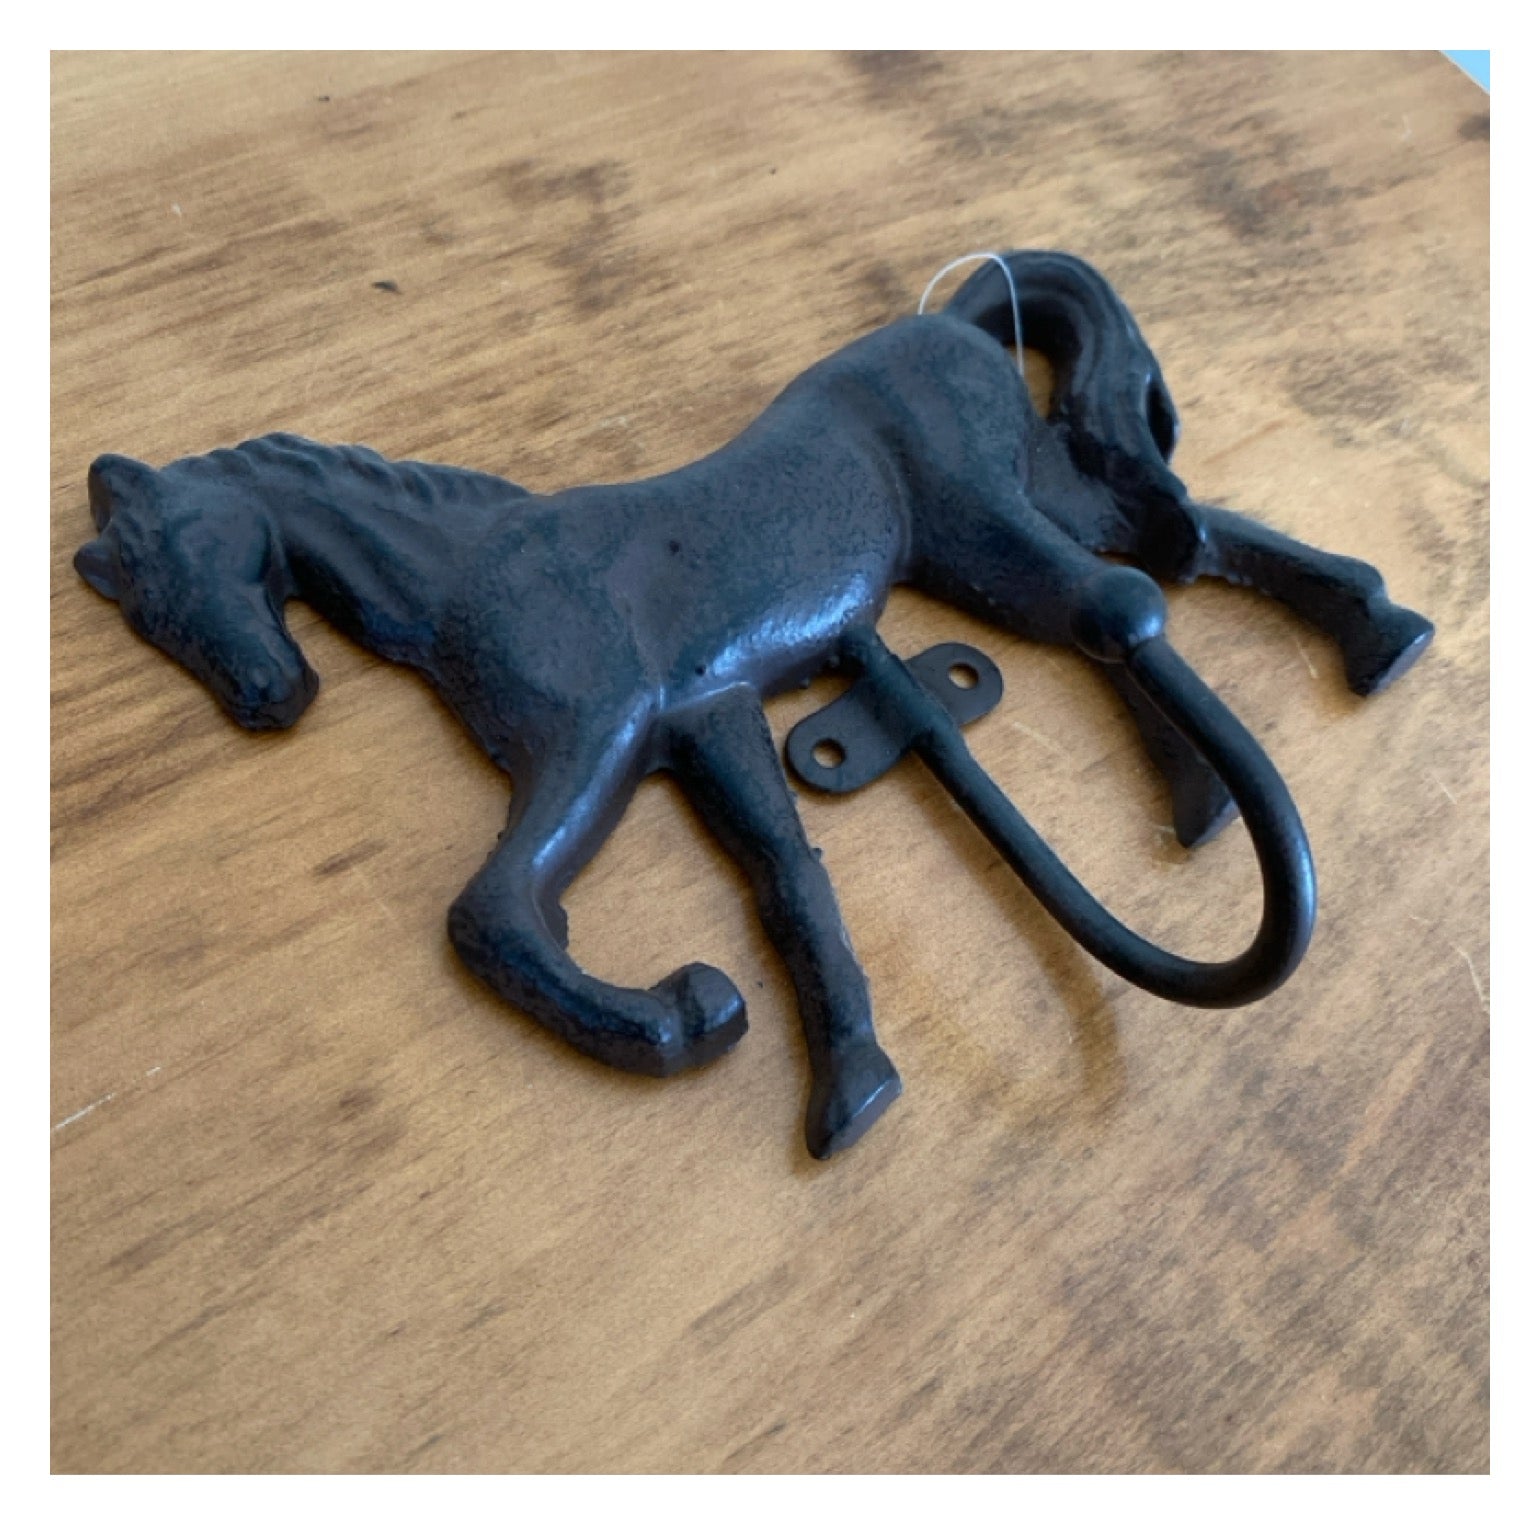 Horse Hook Rustic Cast Iron Prancing - The Renmy Store Homewares & Gifts 